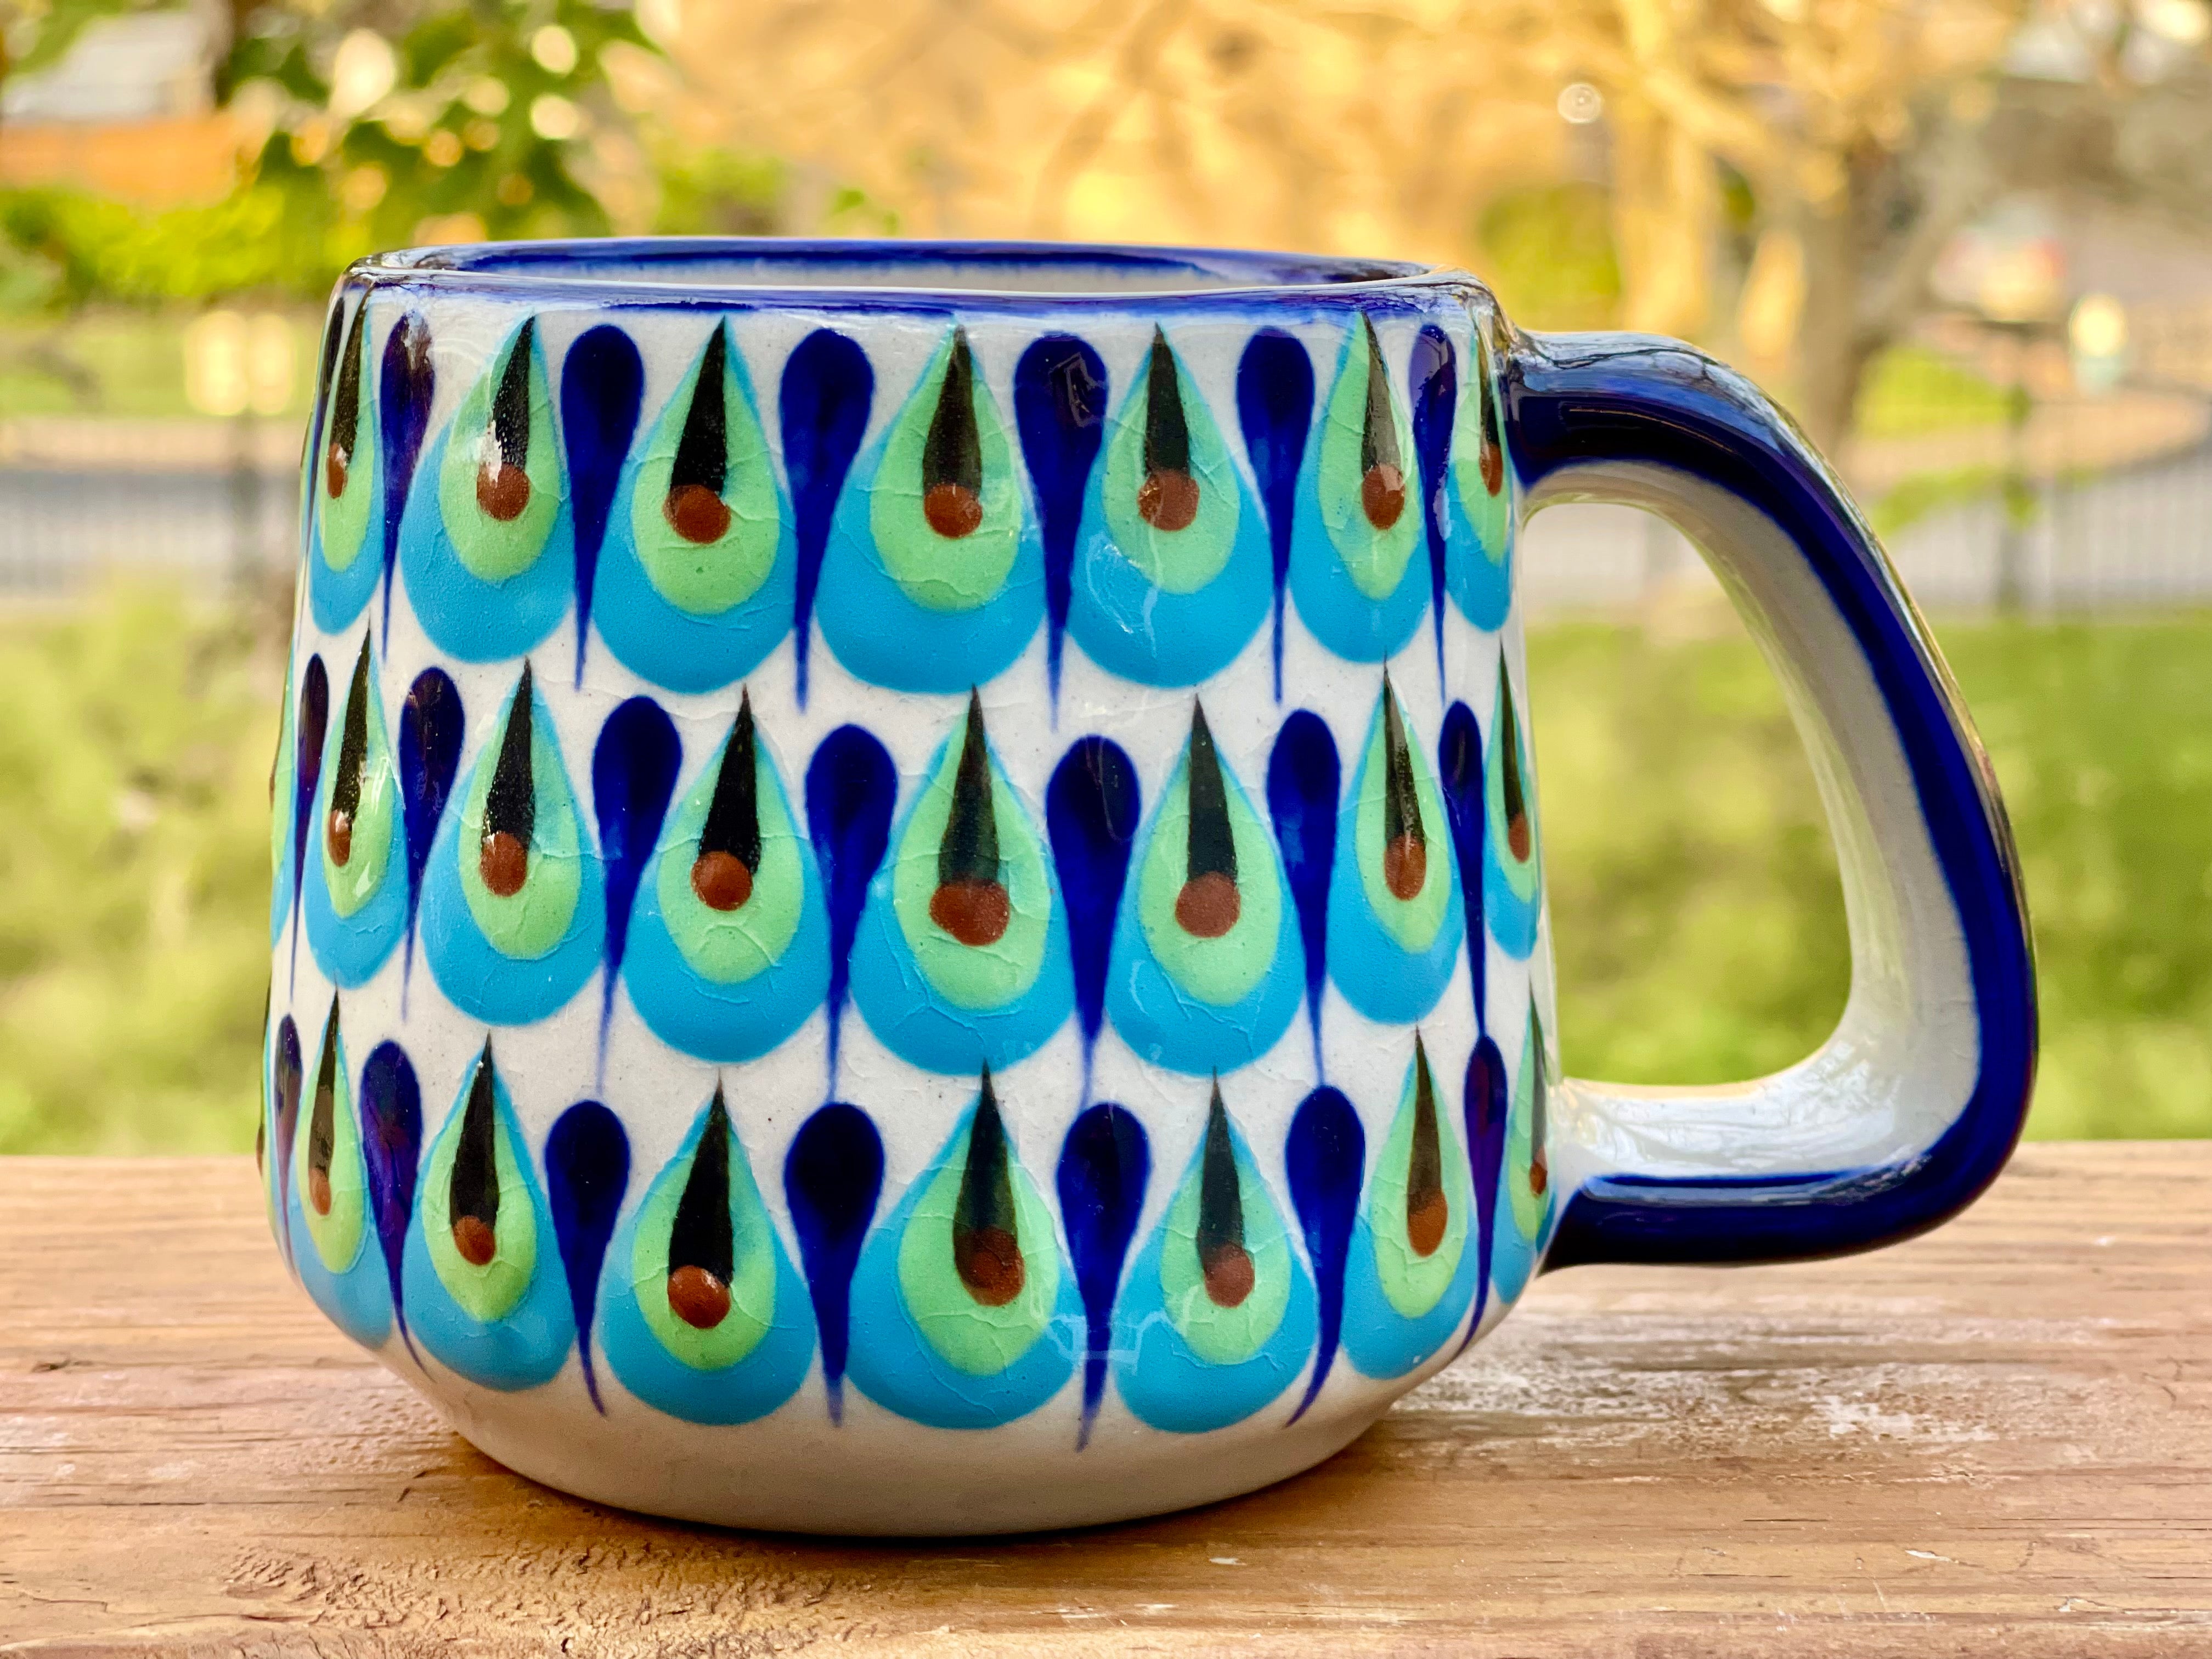 These Beautiful Mugs From Local Shops Make Coffee More Enjoyable